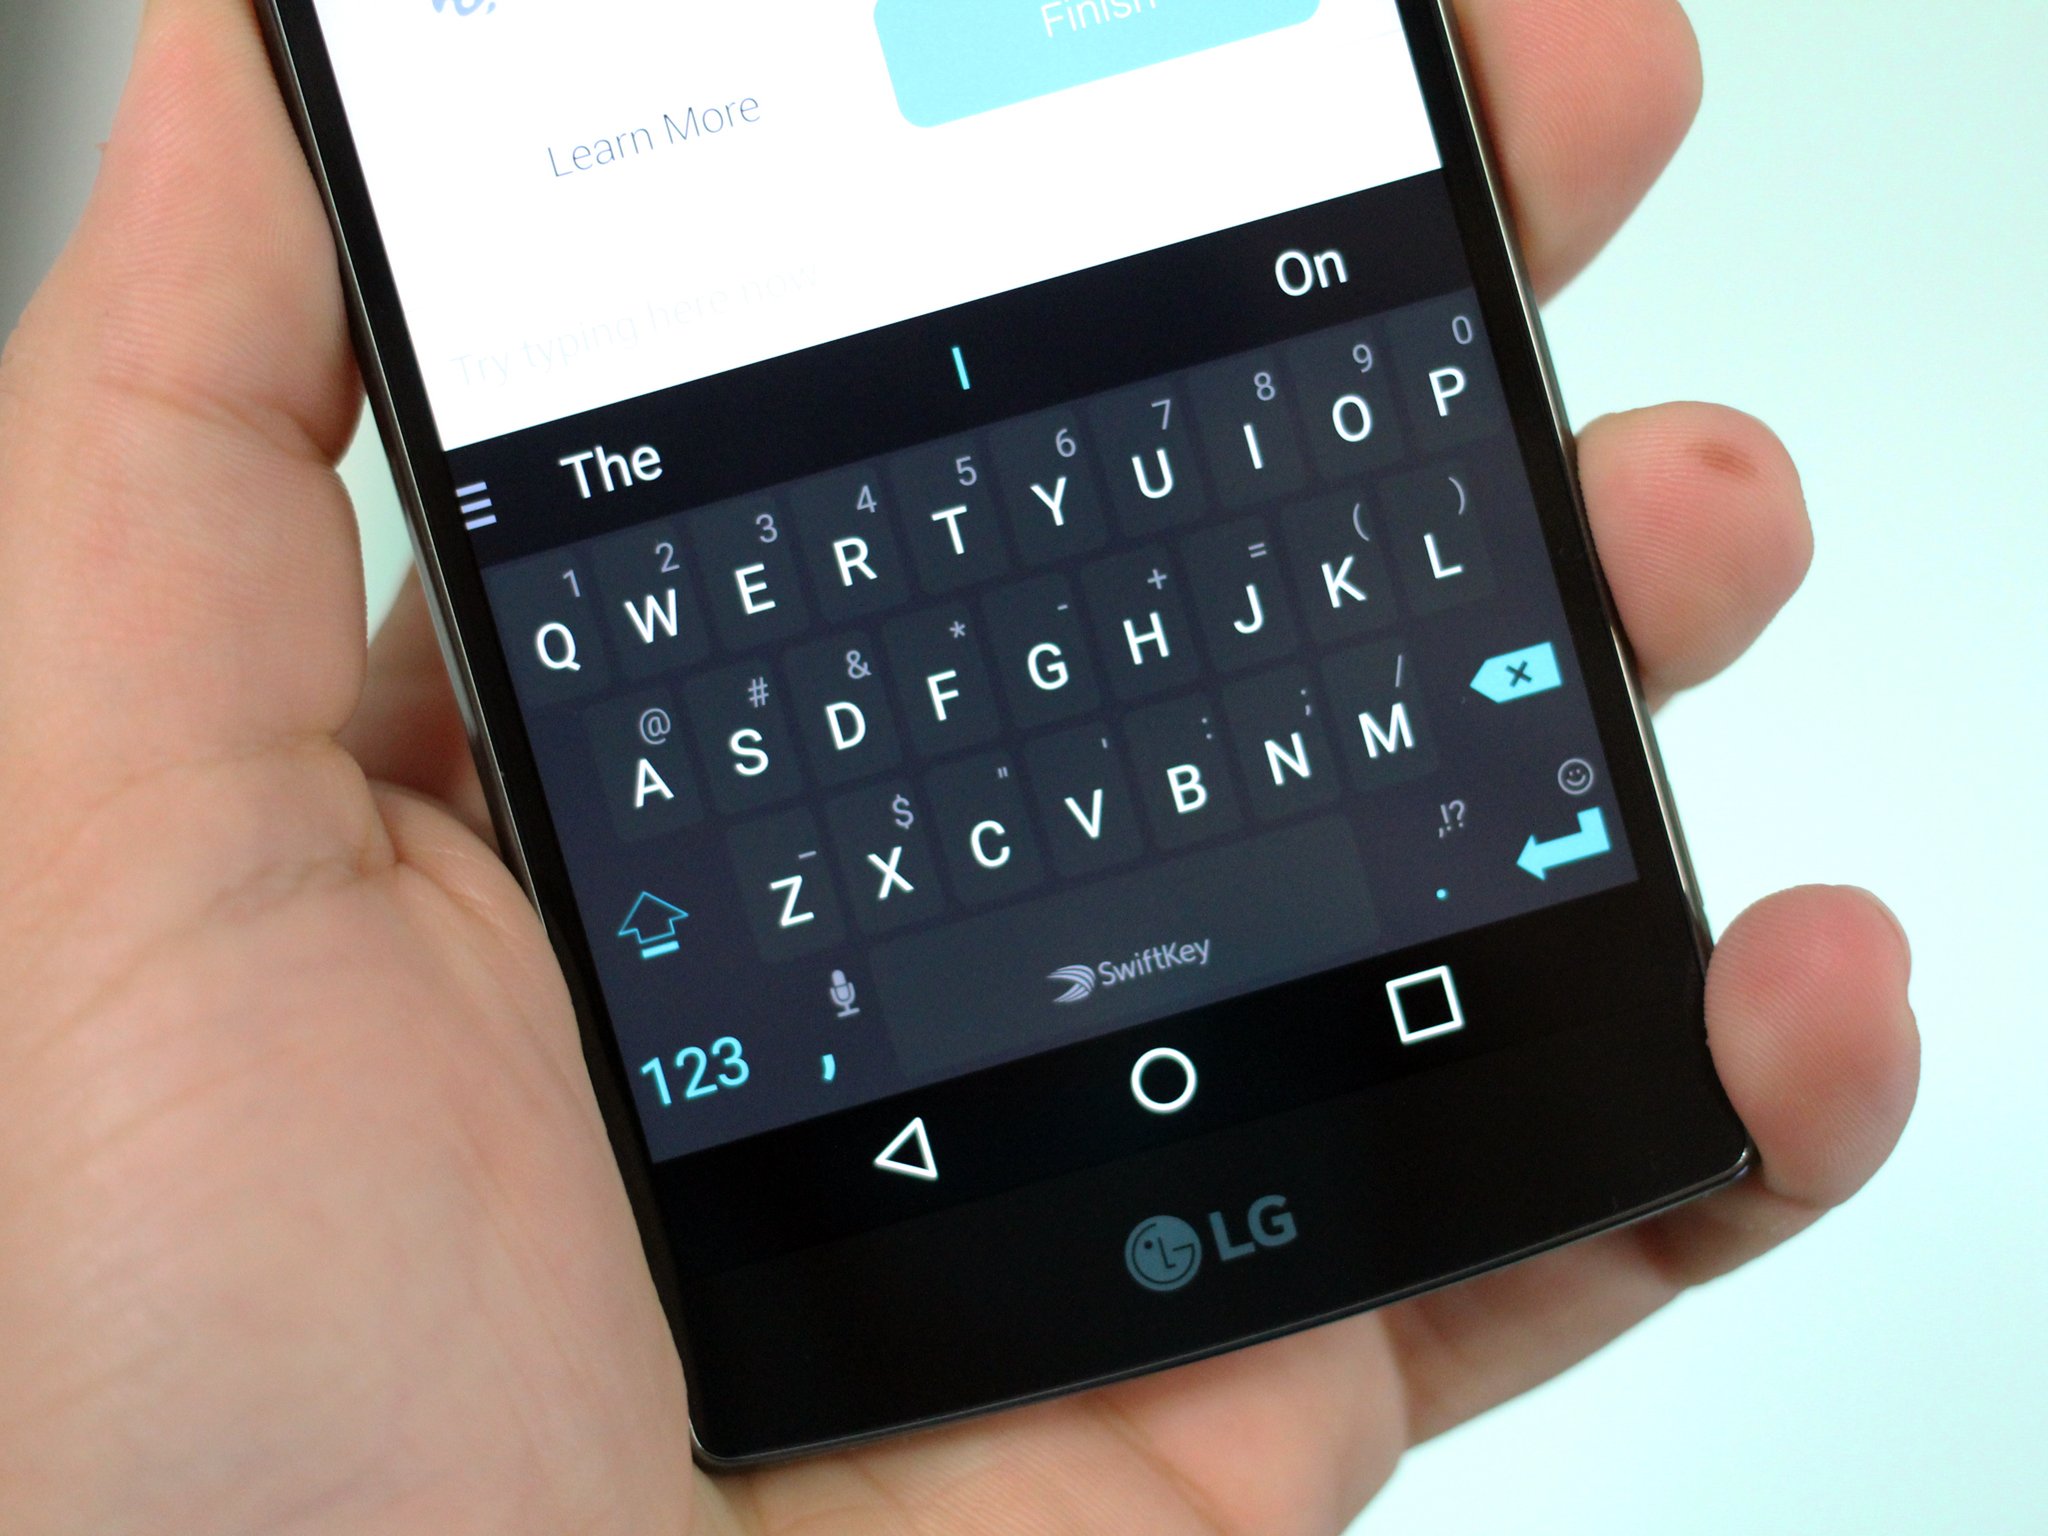 https://www.windowscentral.com/sites/wpcentral.com/files/styles/large_wm_brb/public/article_images/2015/05/swiftkey-carbon-theme-hero.jpg?itok=Cmti7J5R